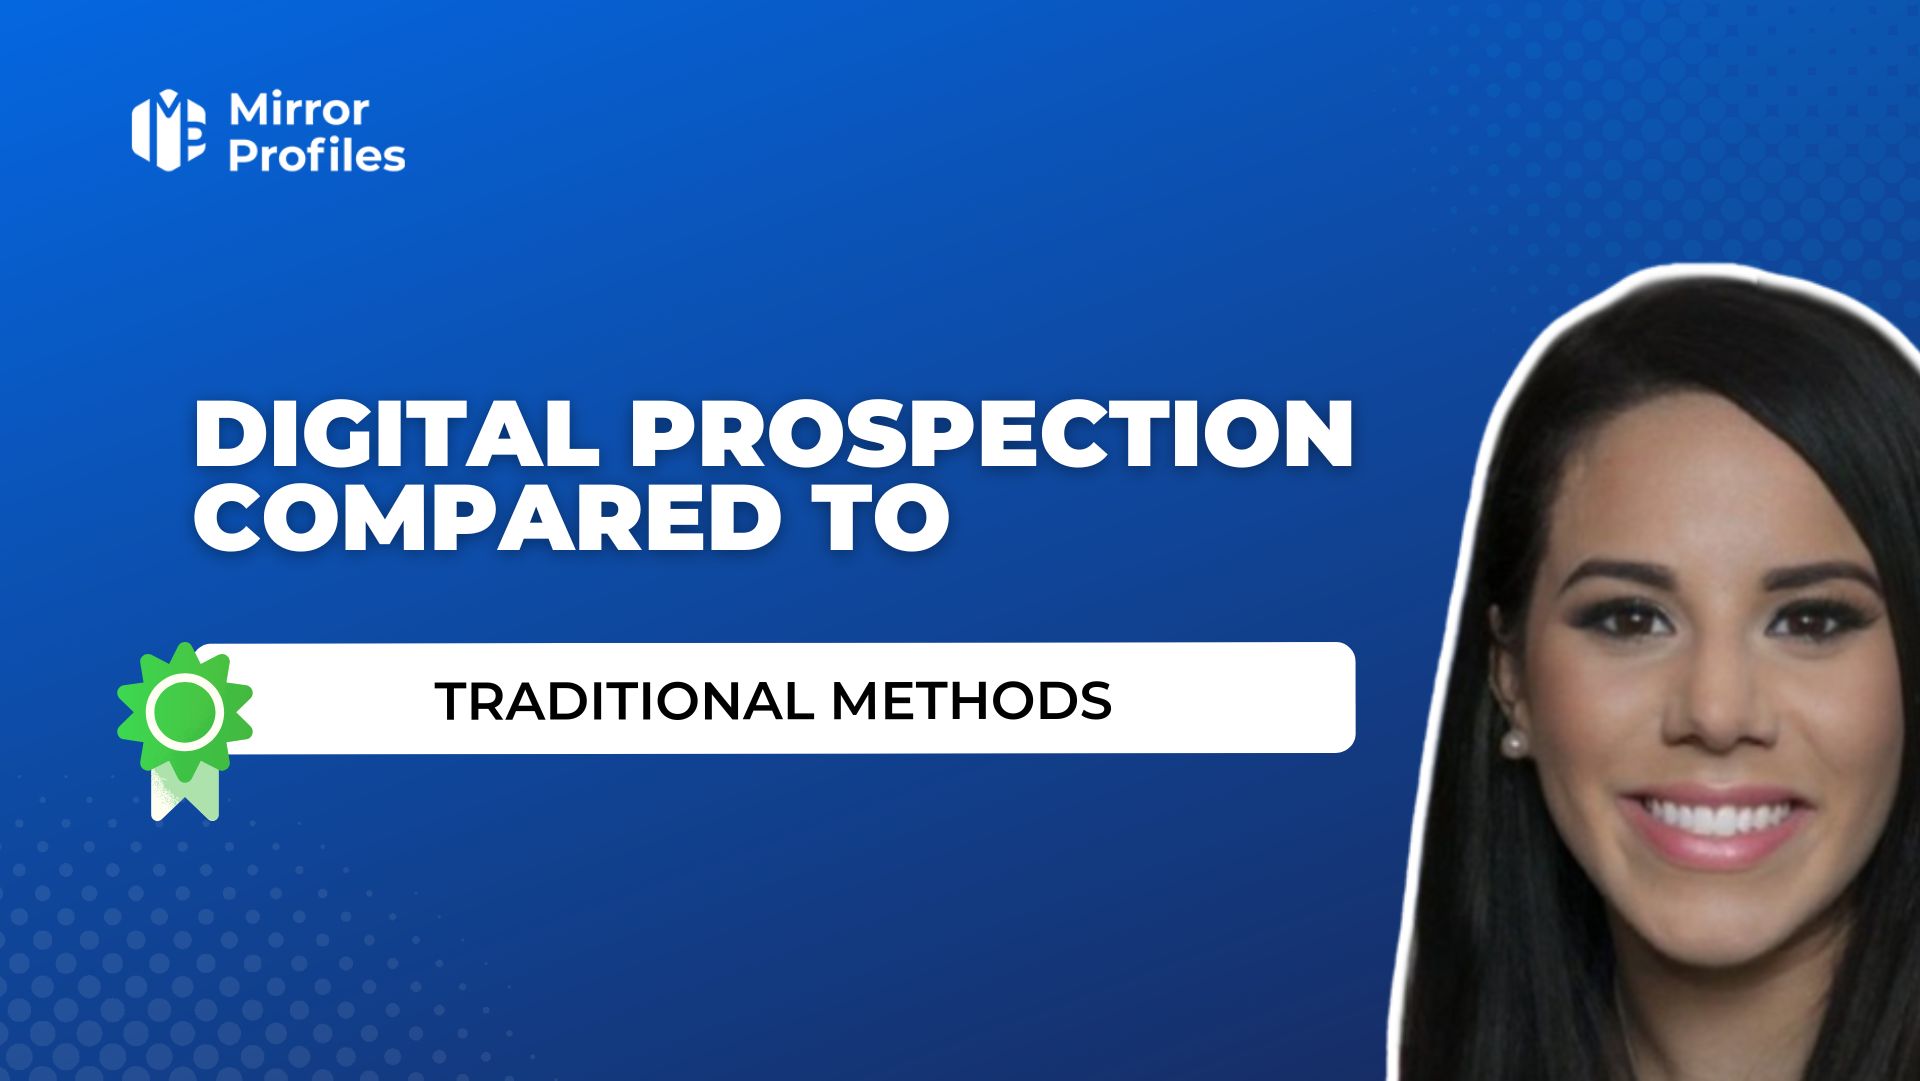 The advantages of digital prospecting compared to traditional methods